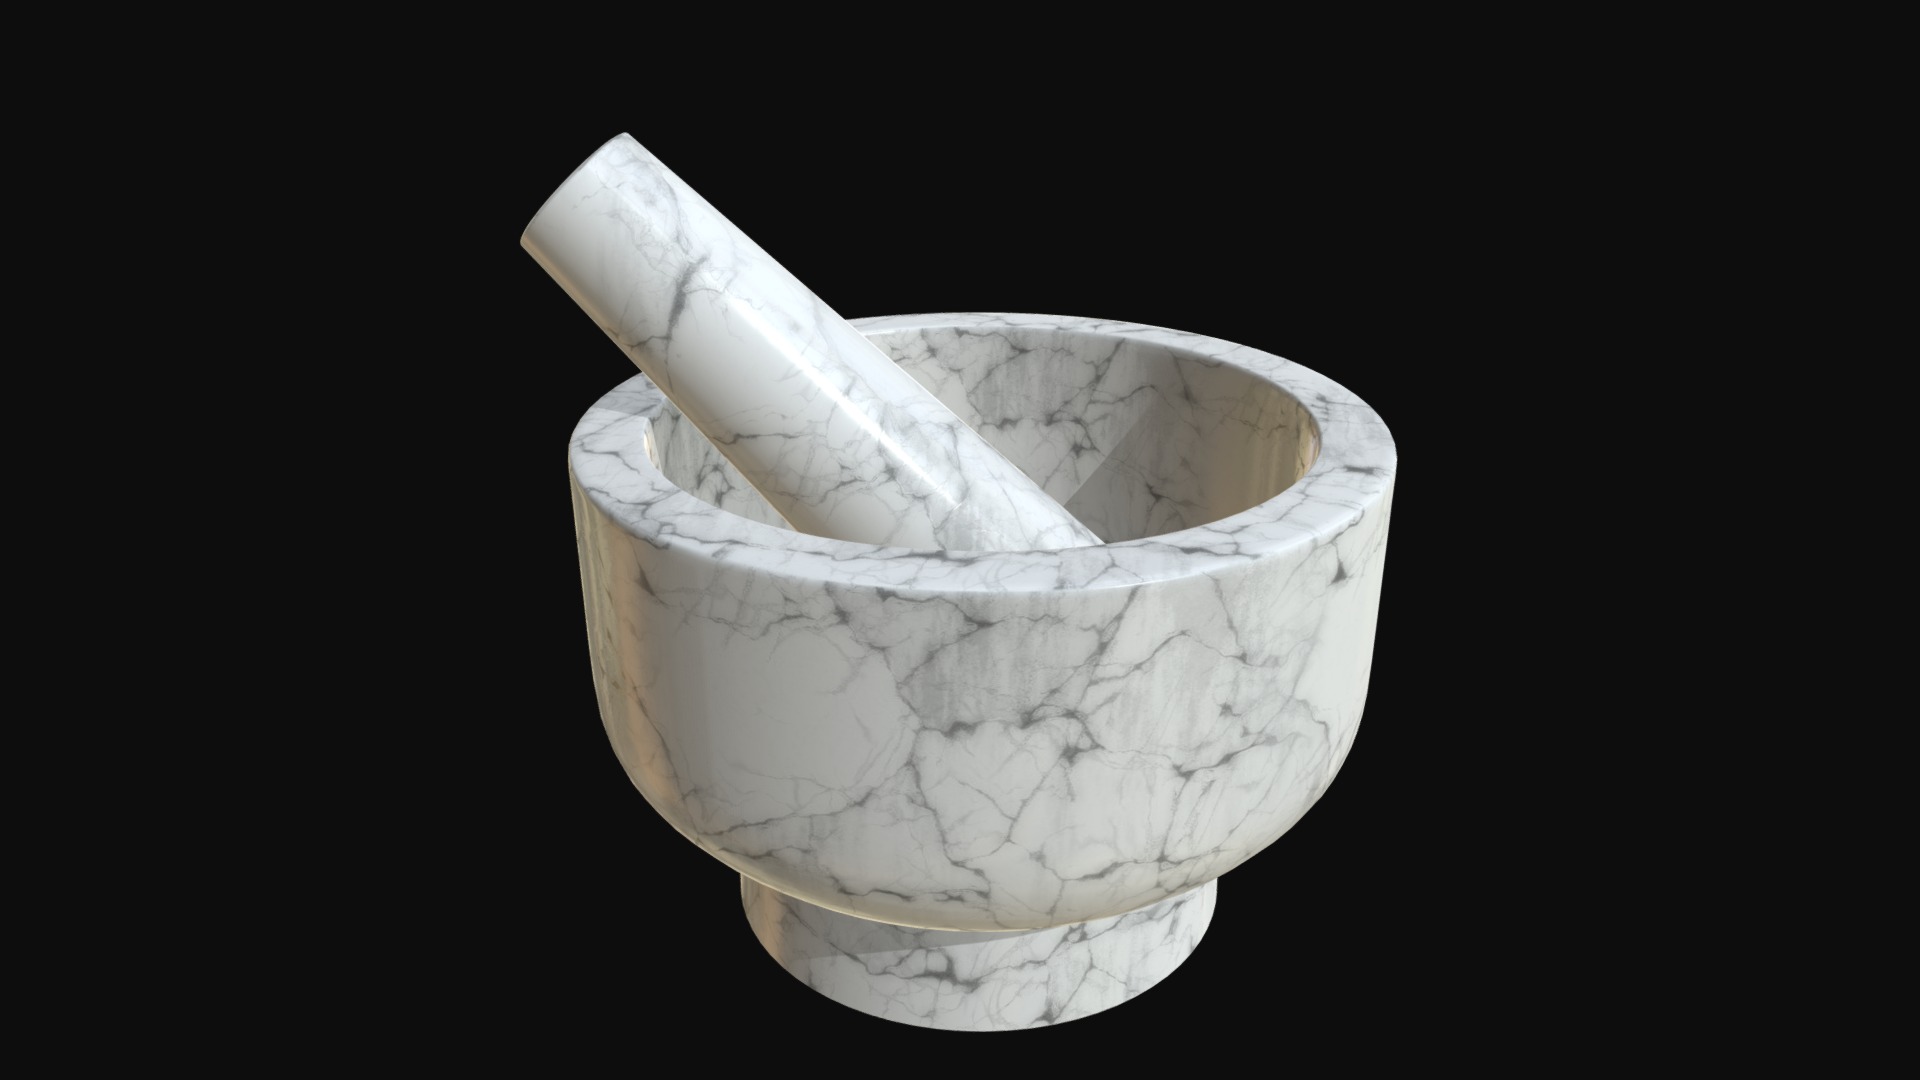 3D model Kitchen mortar and pestle - This is a 3D model of the Kitchen mortar and pestle. The 3D model is about a white bowl with a spoon in it.